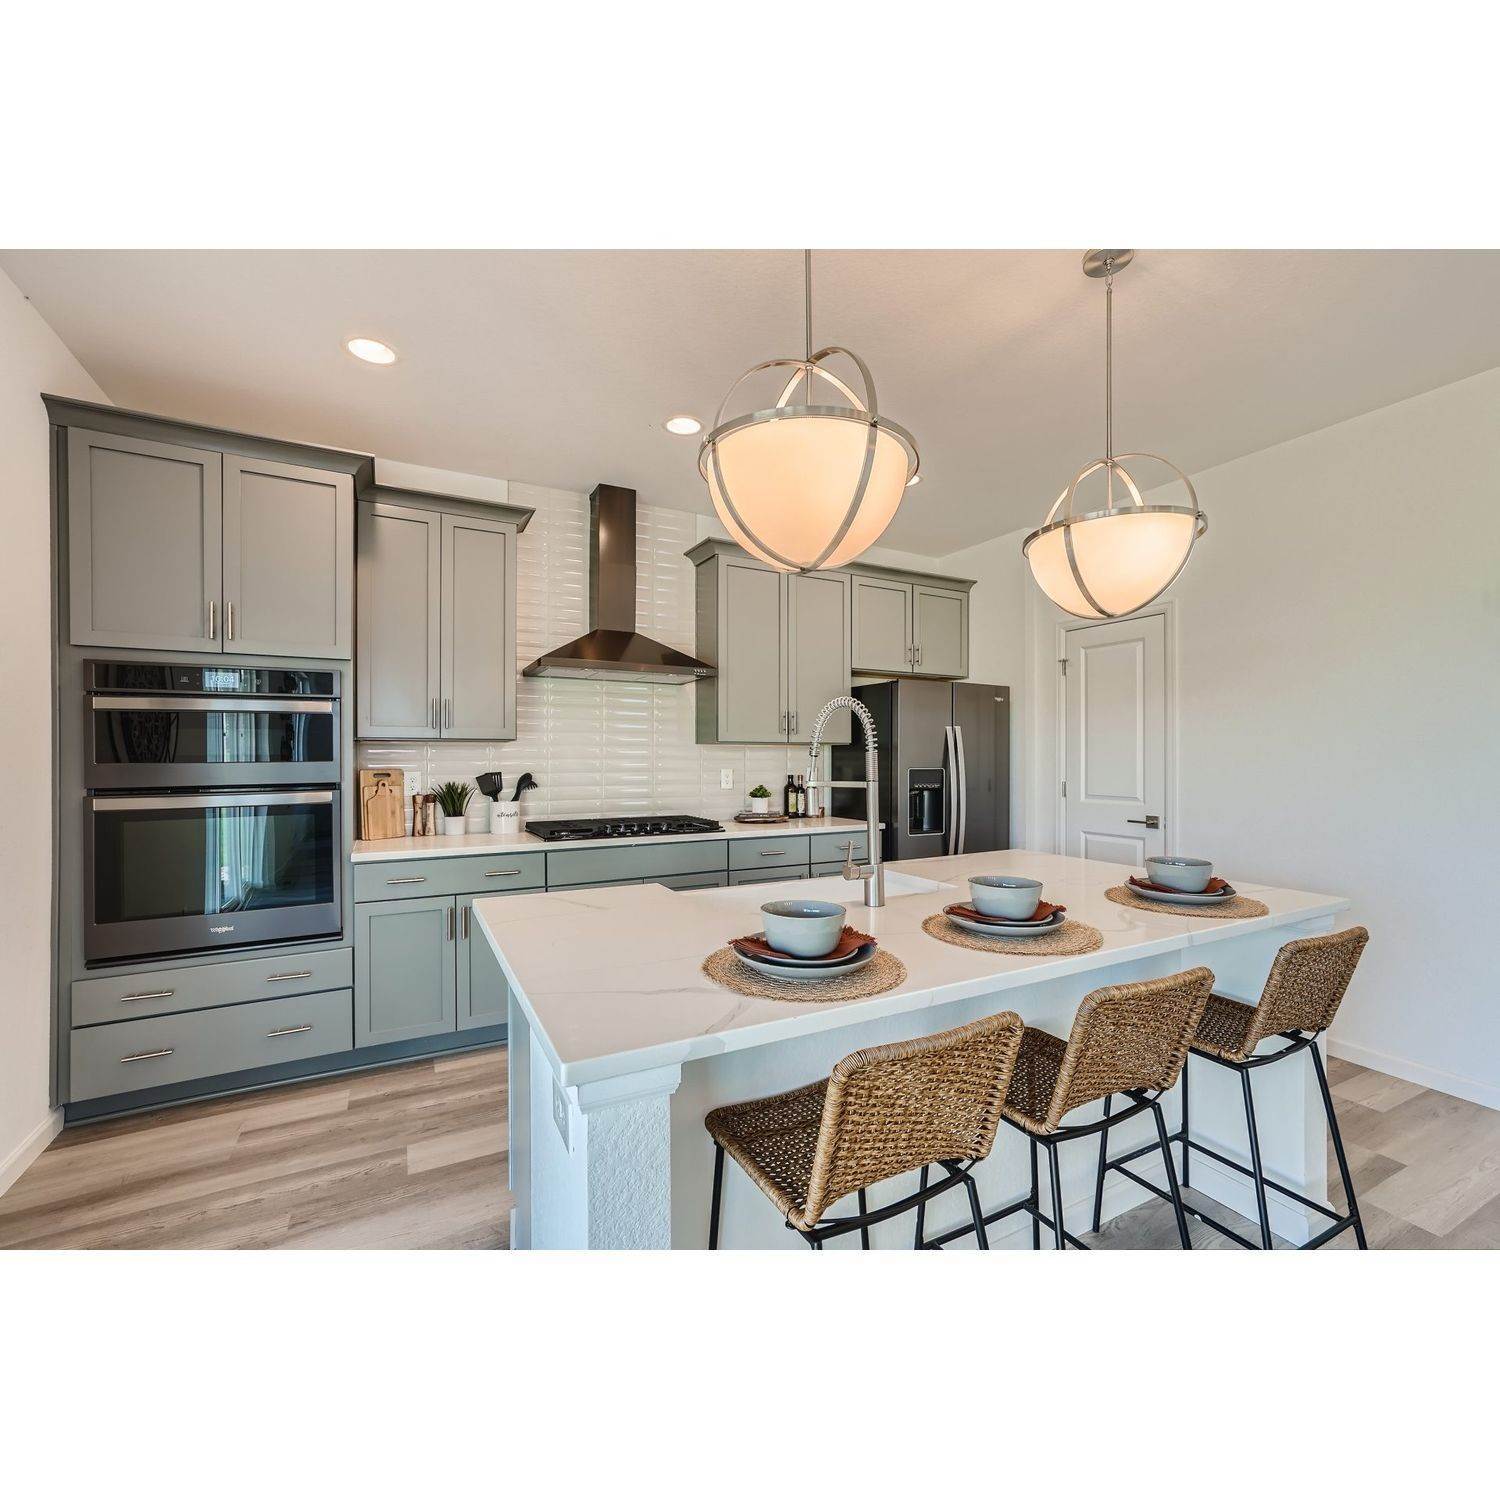 10. Reserve at Timberline building at 1844 Foggy Brook Drive, Fort Collins, CO 80528